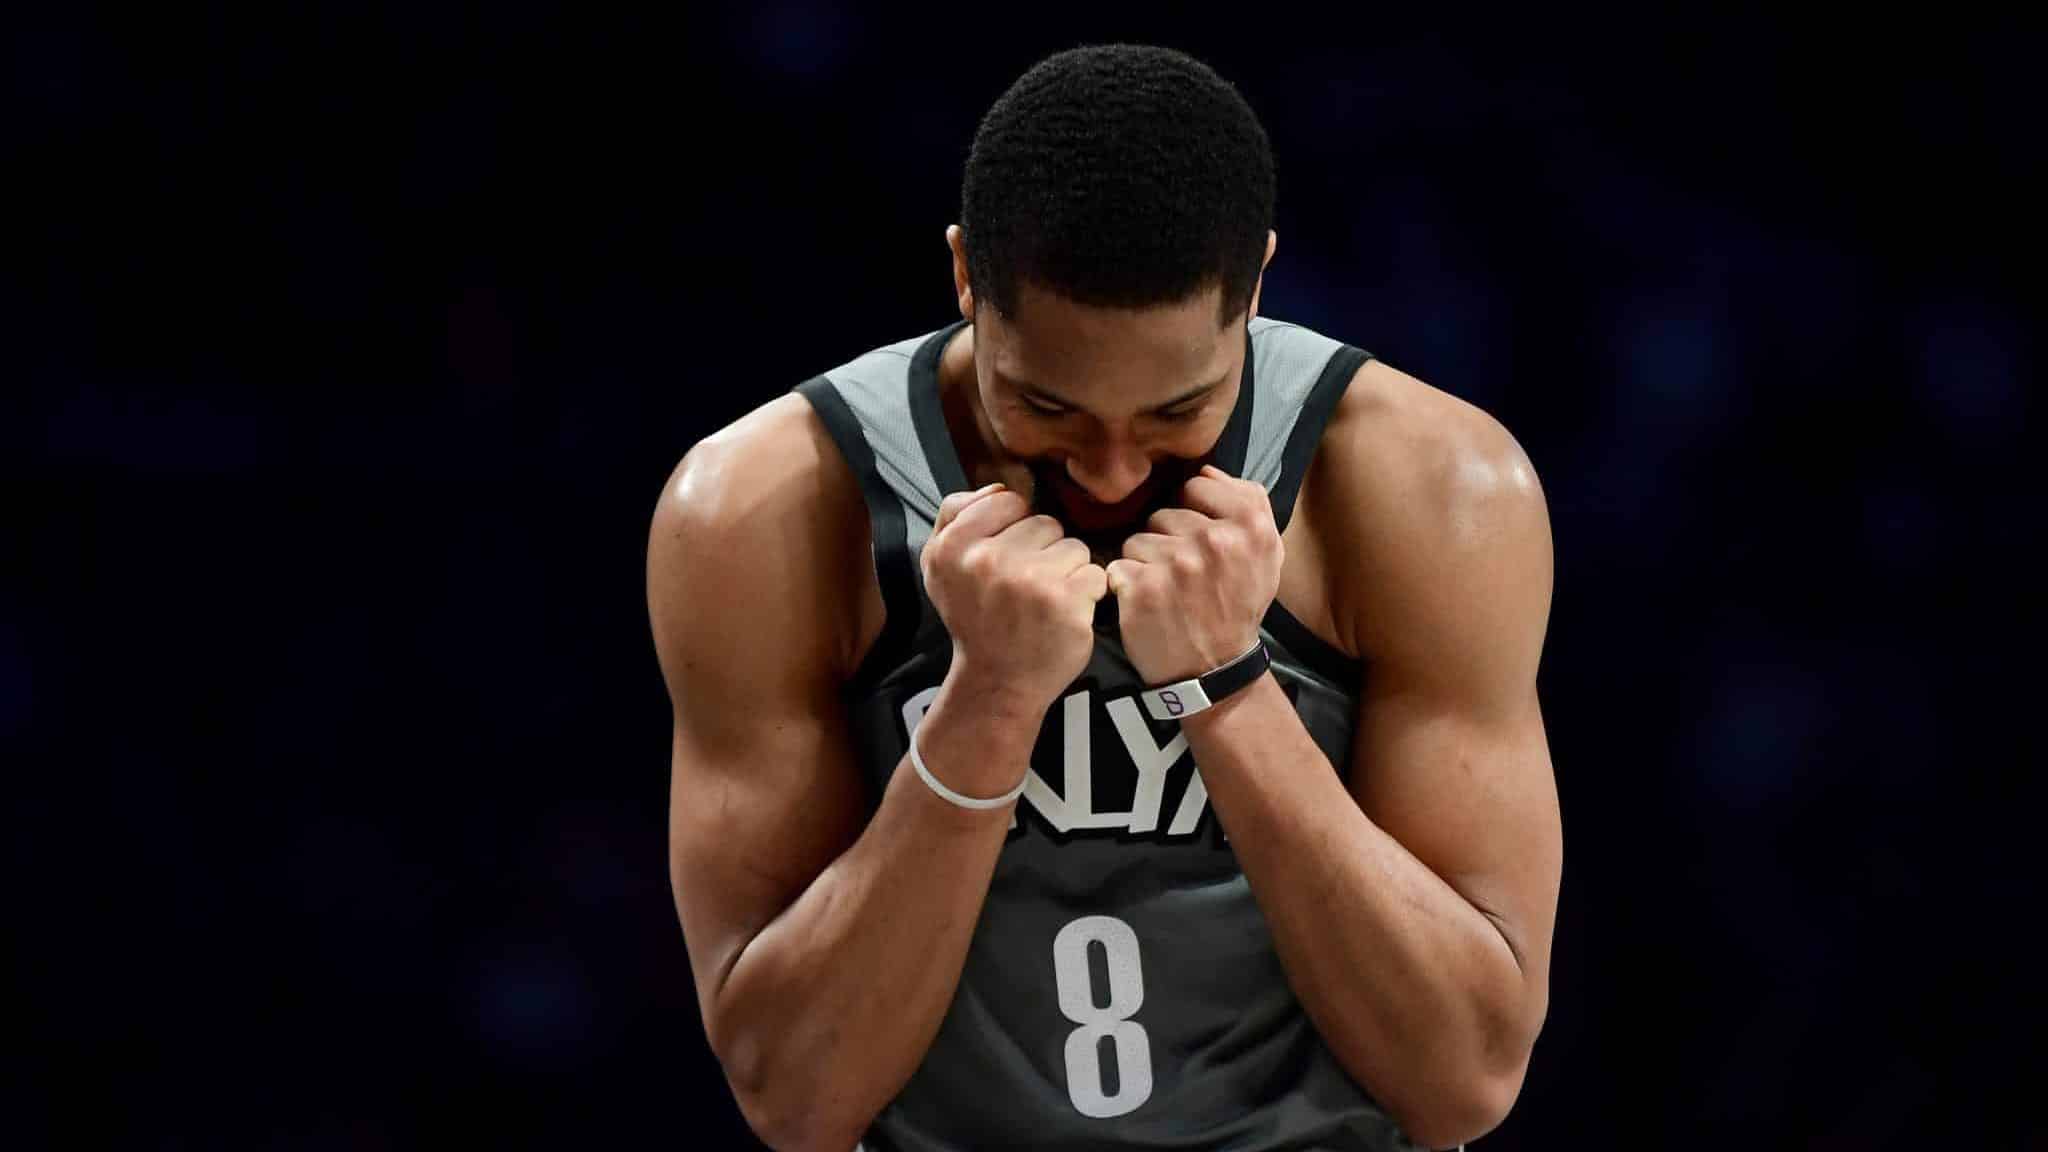 NEW YORK, NEW YORK - DECEMBER 21: Spencer Dinwiddie #8 of the Brooklyn Nets reacts to a foul in the second half of their game against the Atlanta Hawks at Barclays Center on December 21, 2019 in New York City. NOTE TO USER: User expressly acknowledges and agrees that, by downloading and or using this photograph, User is consenting to the terms and conditions of the Getty Images License Agreement.